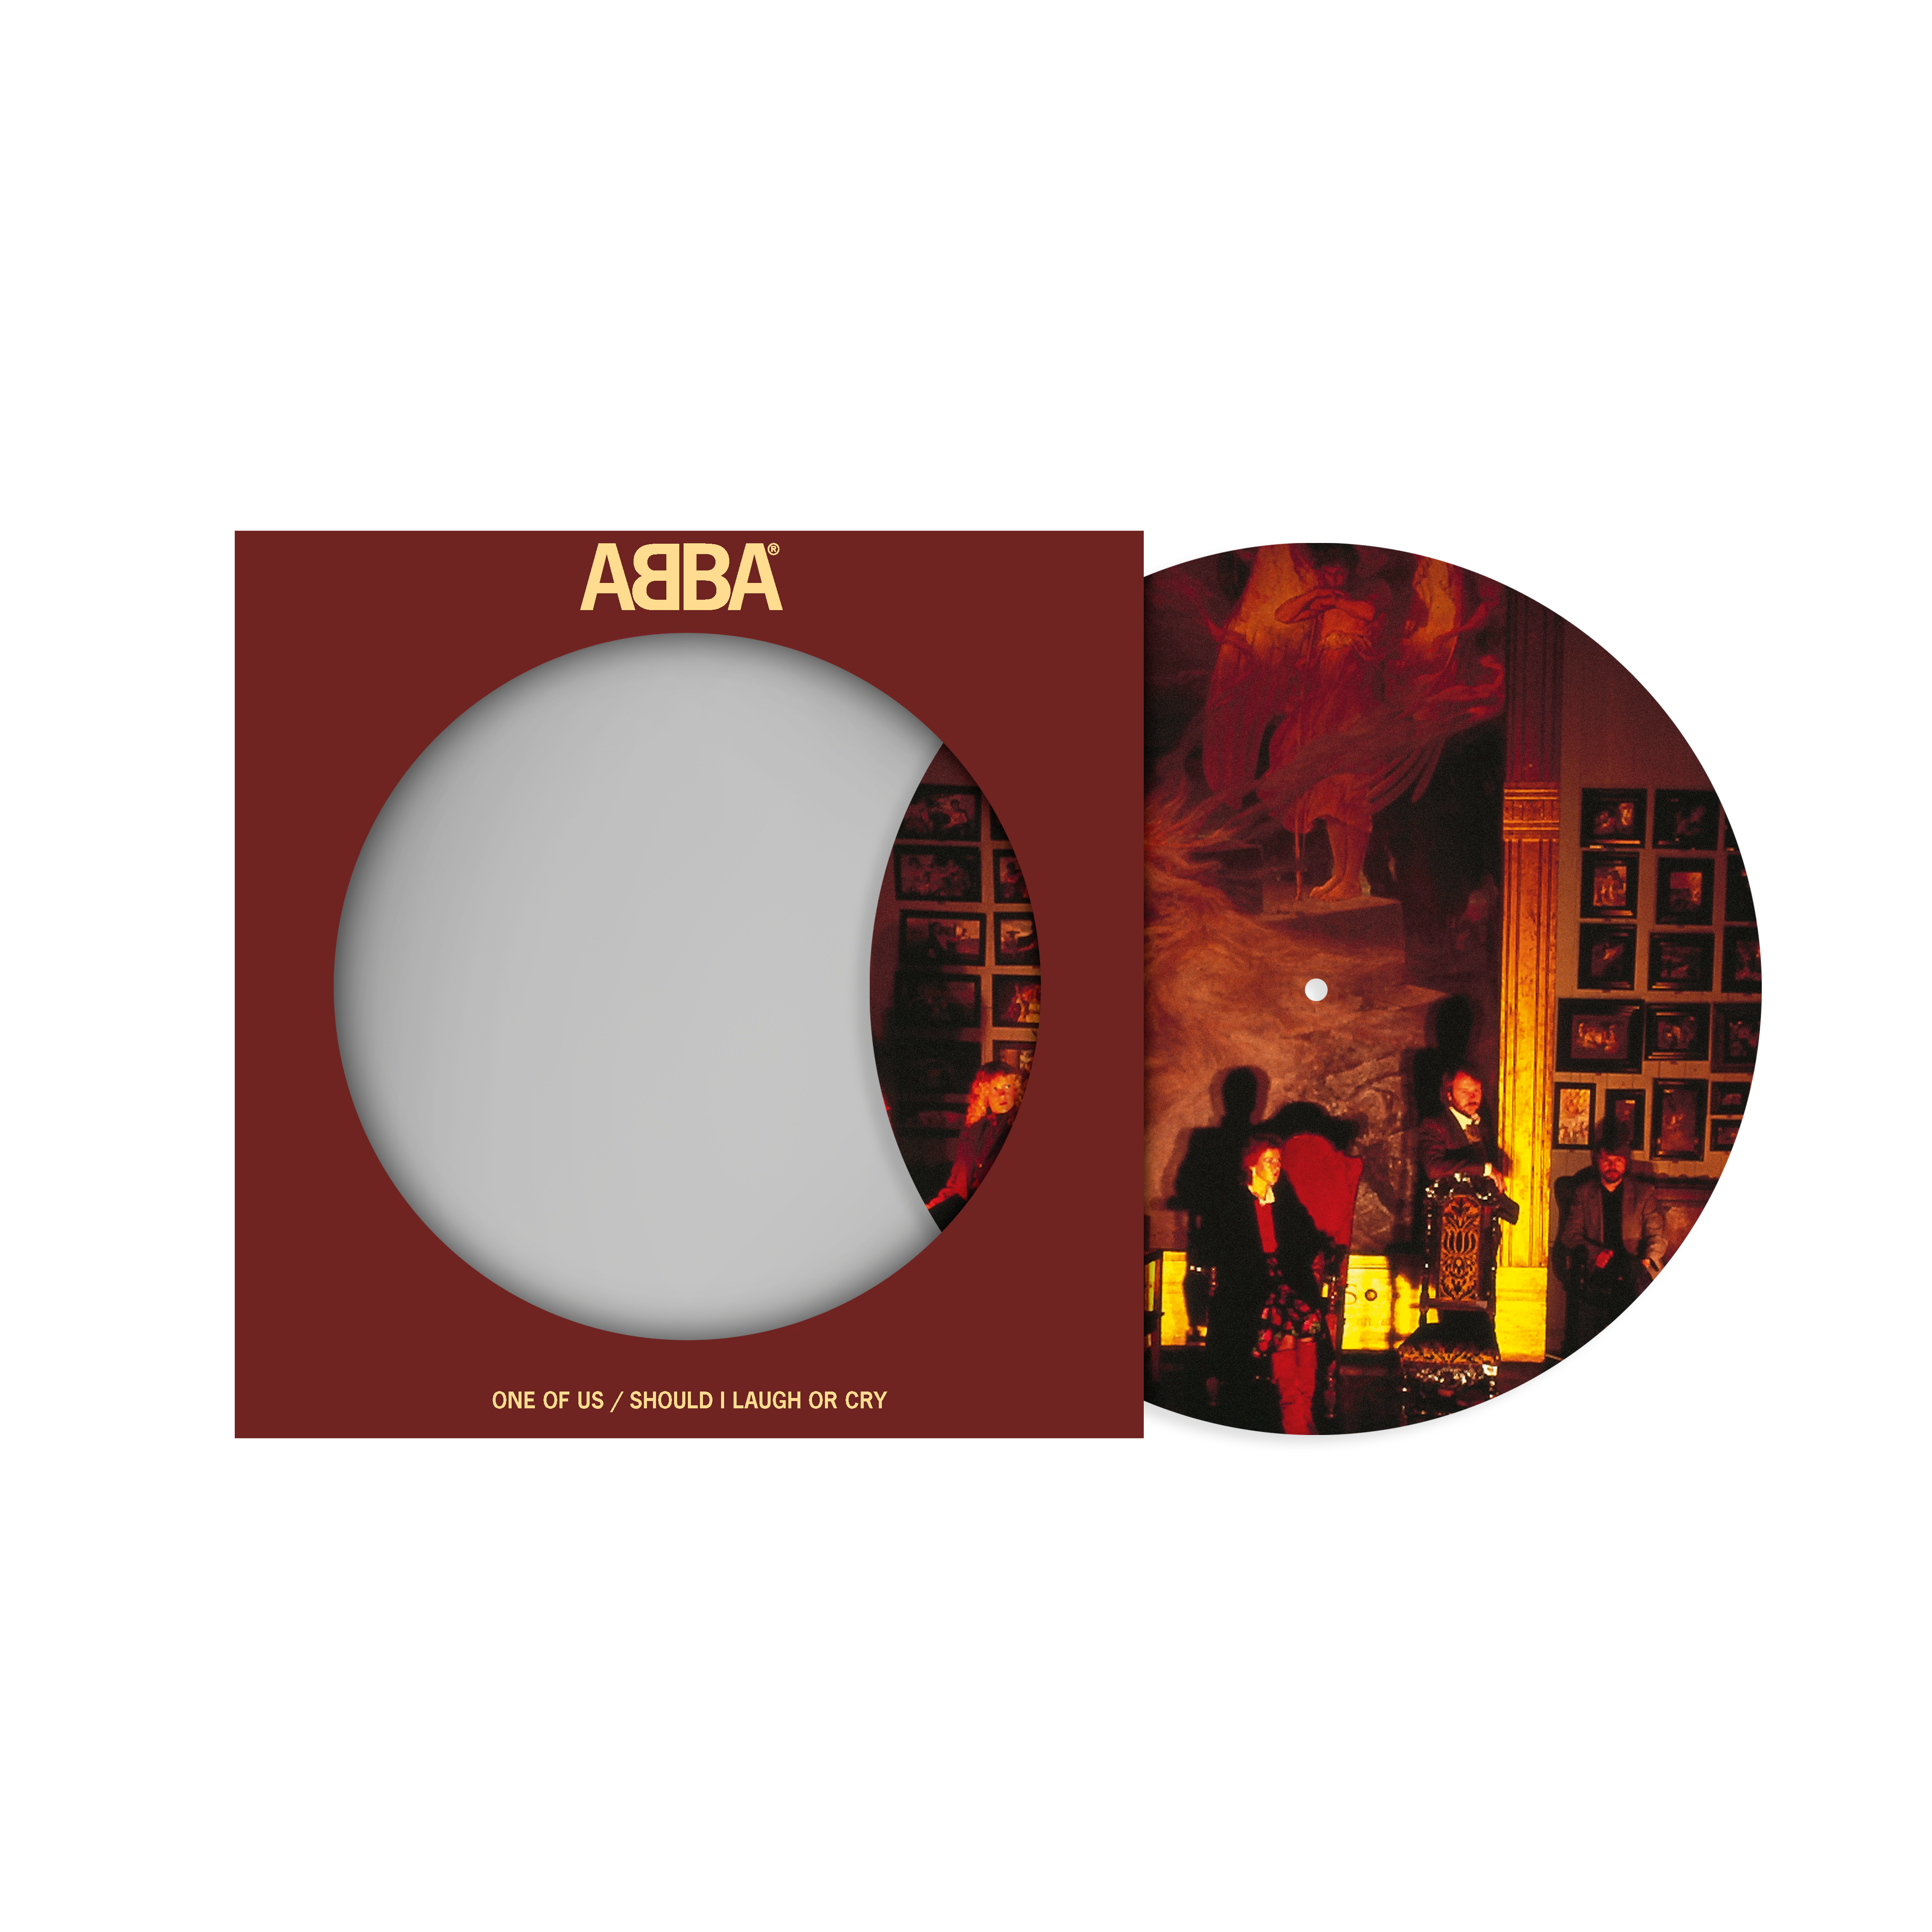 ABBA - One Of Us: Picture Disc Vinyl 7" Single